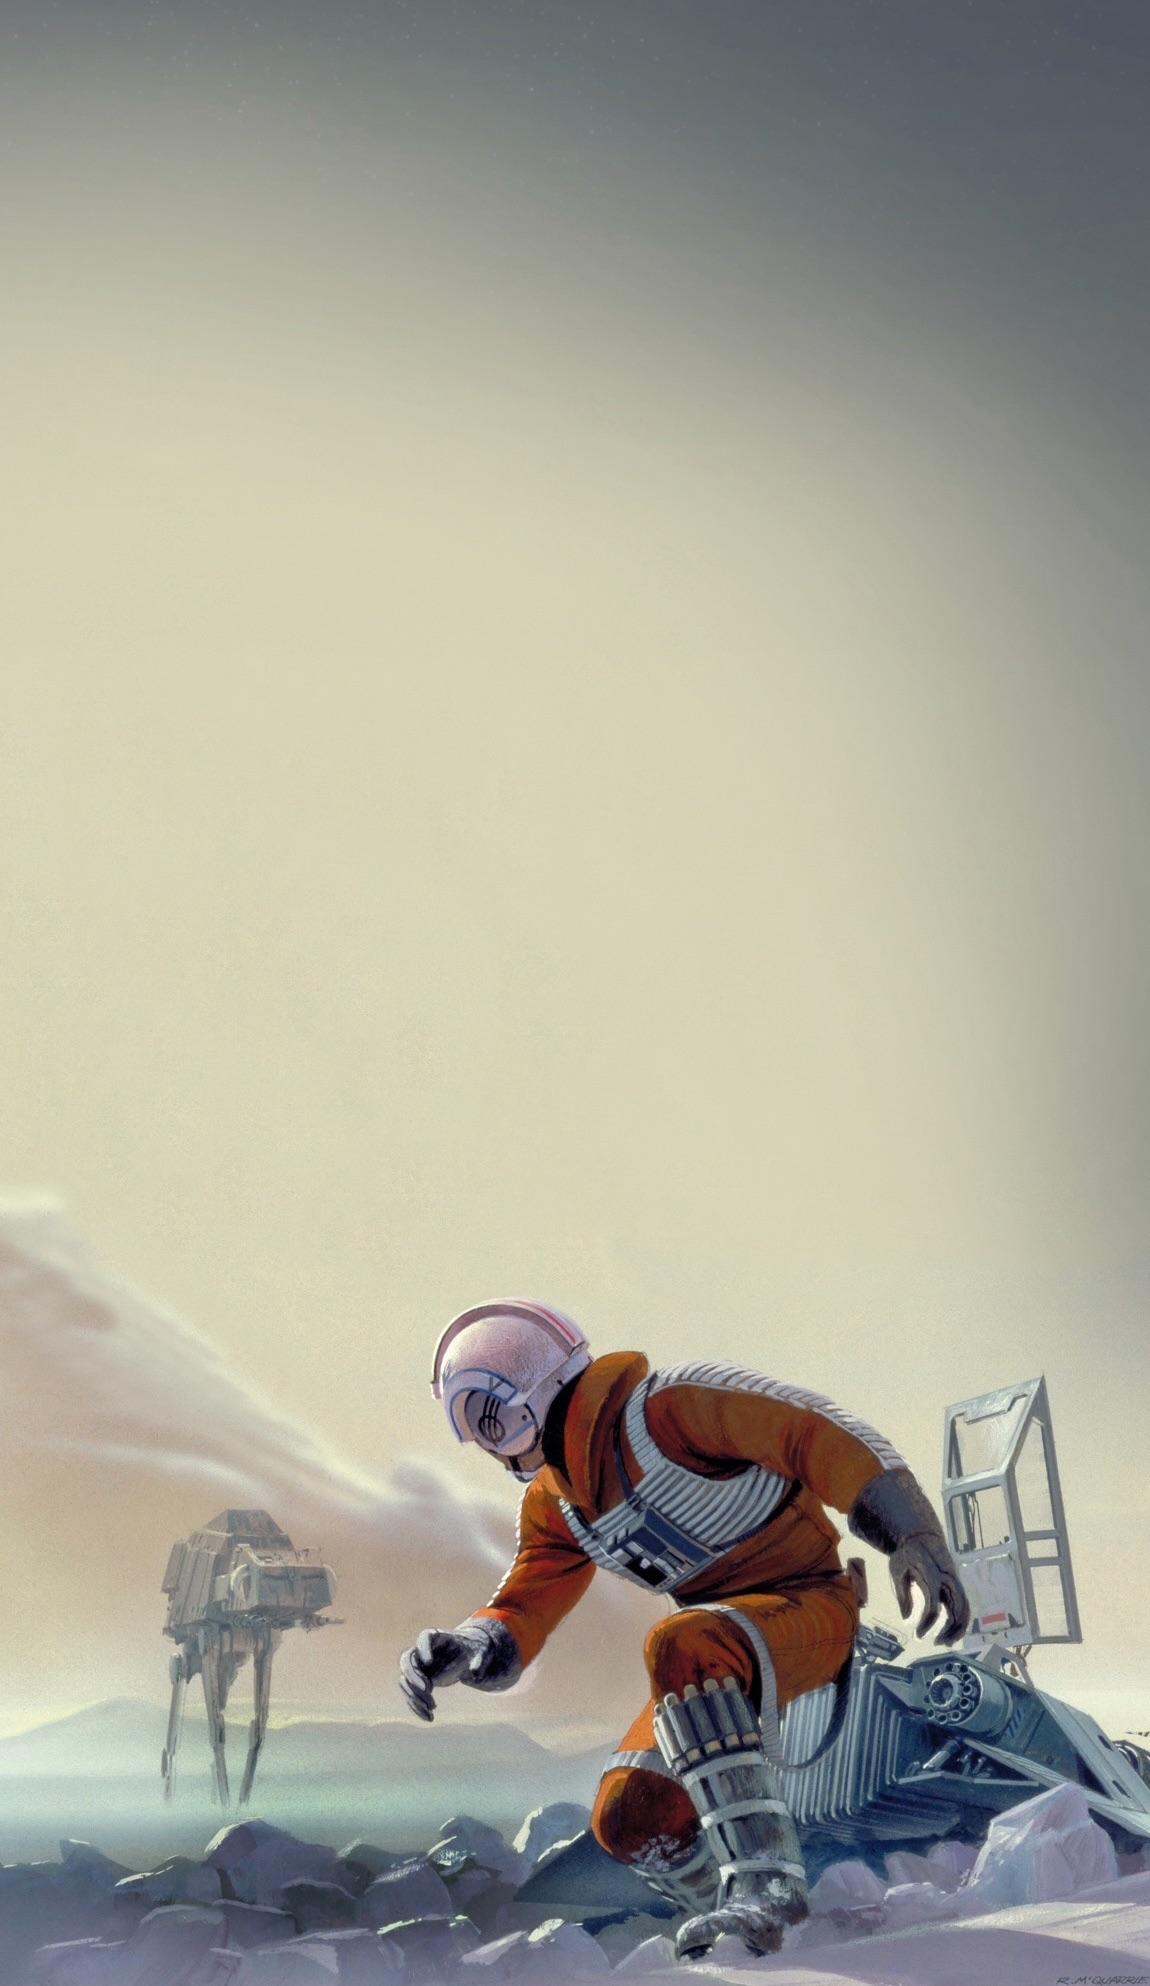 A chilly Hoth wallpaper